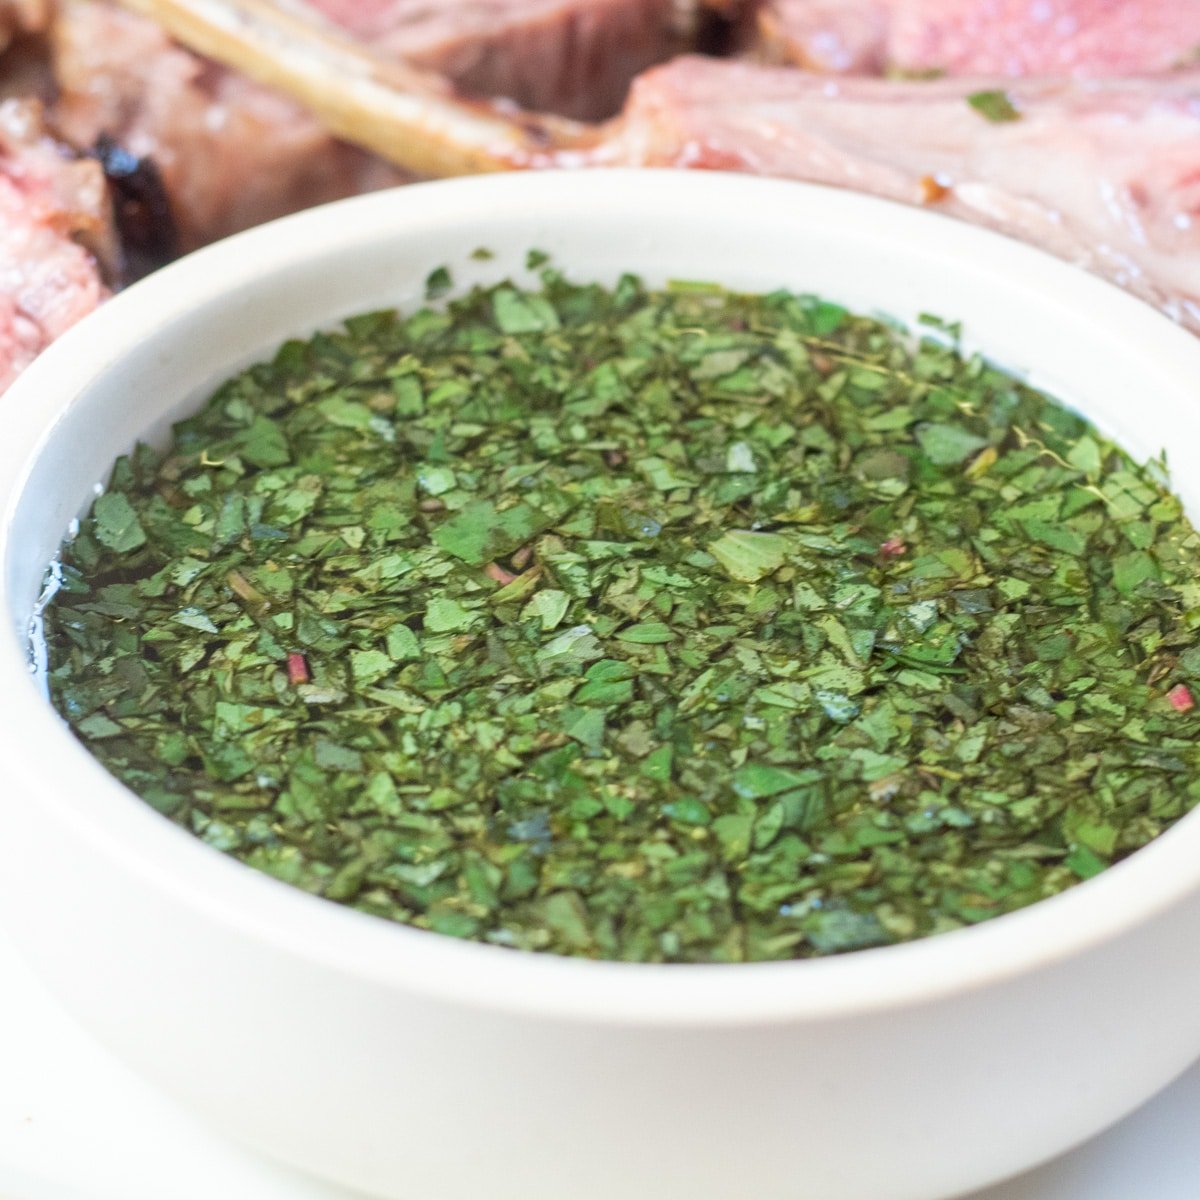 Square image of mint sauce for lamb.